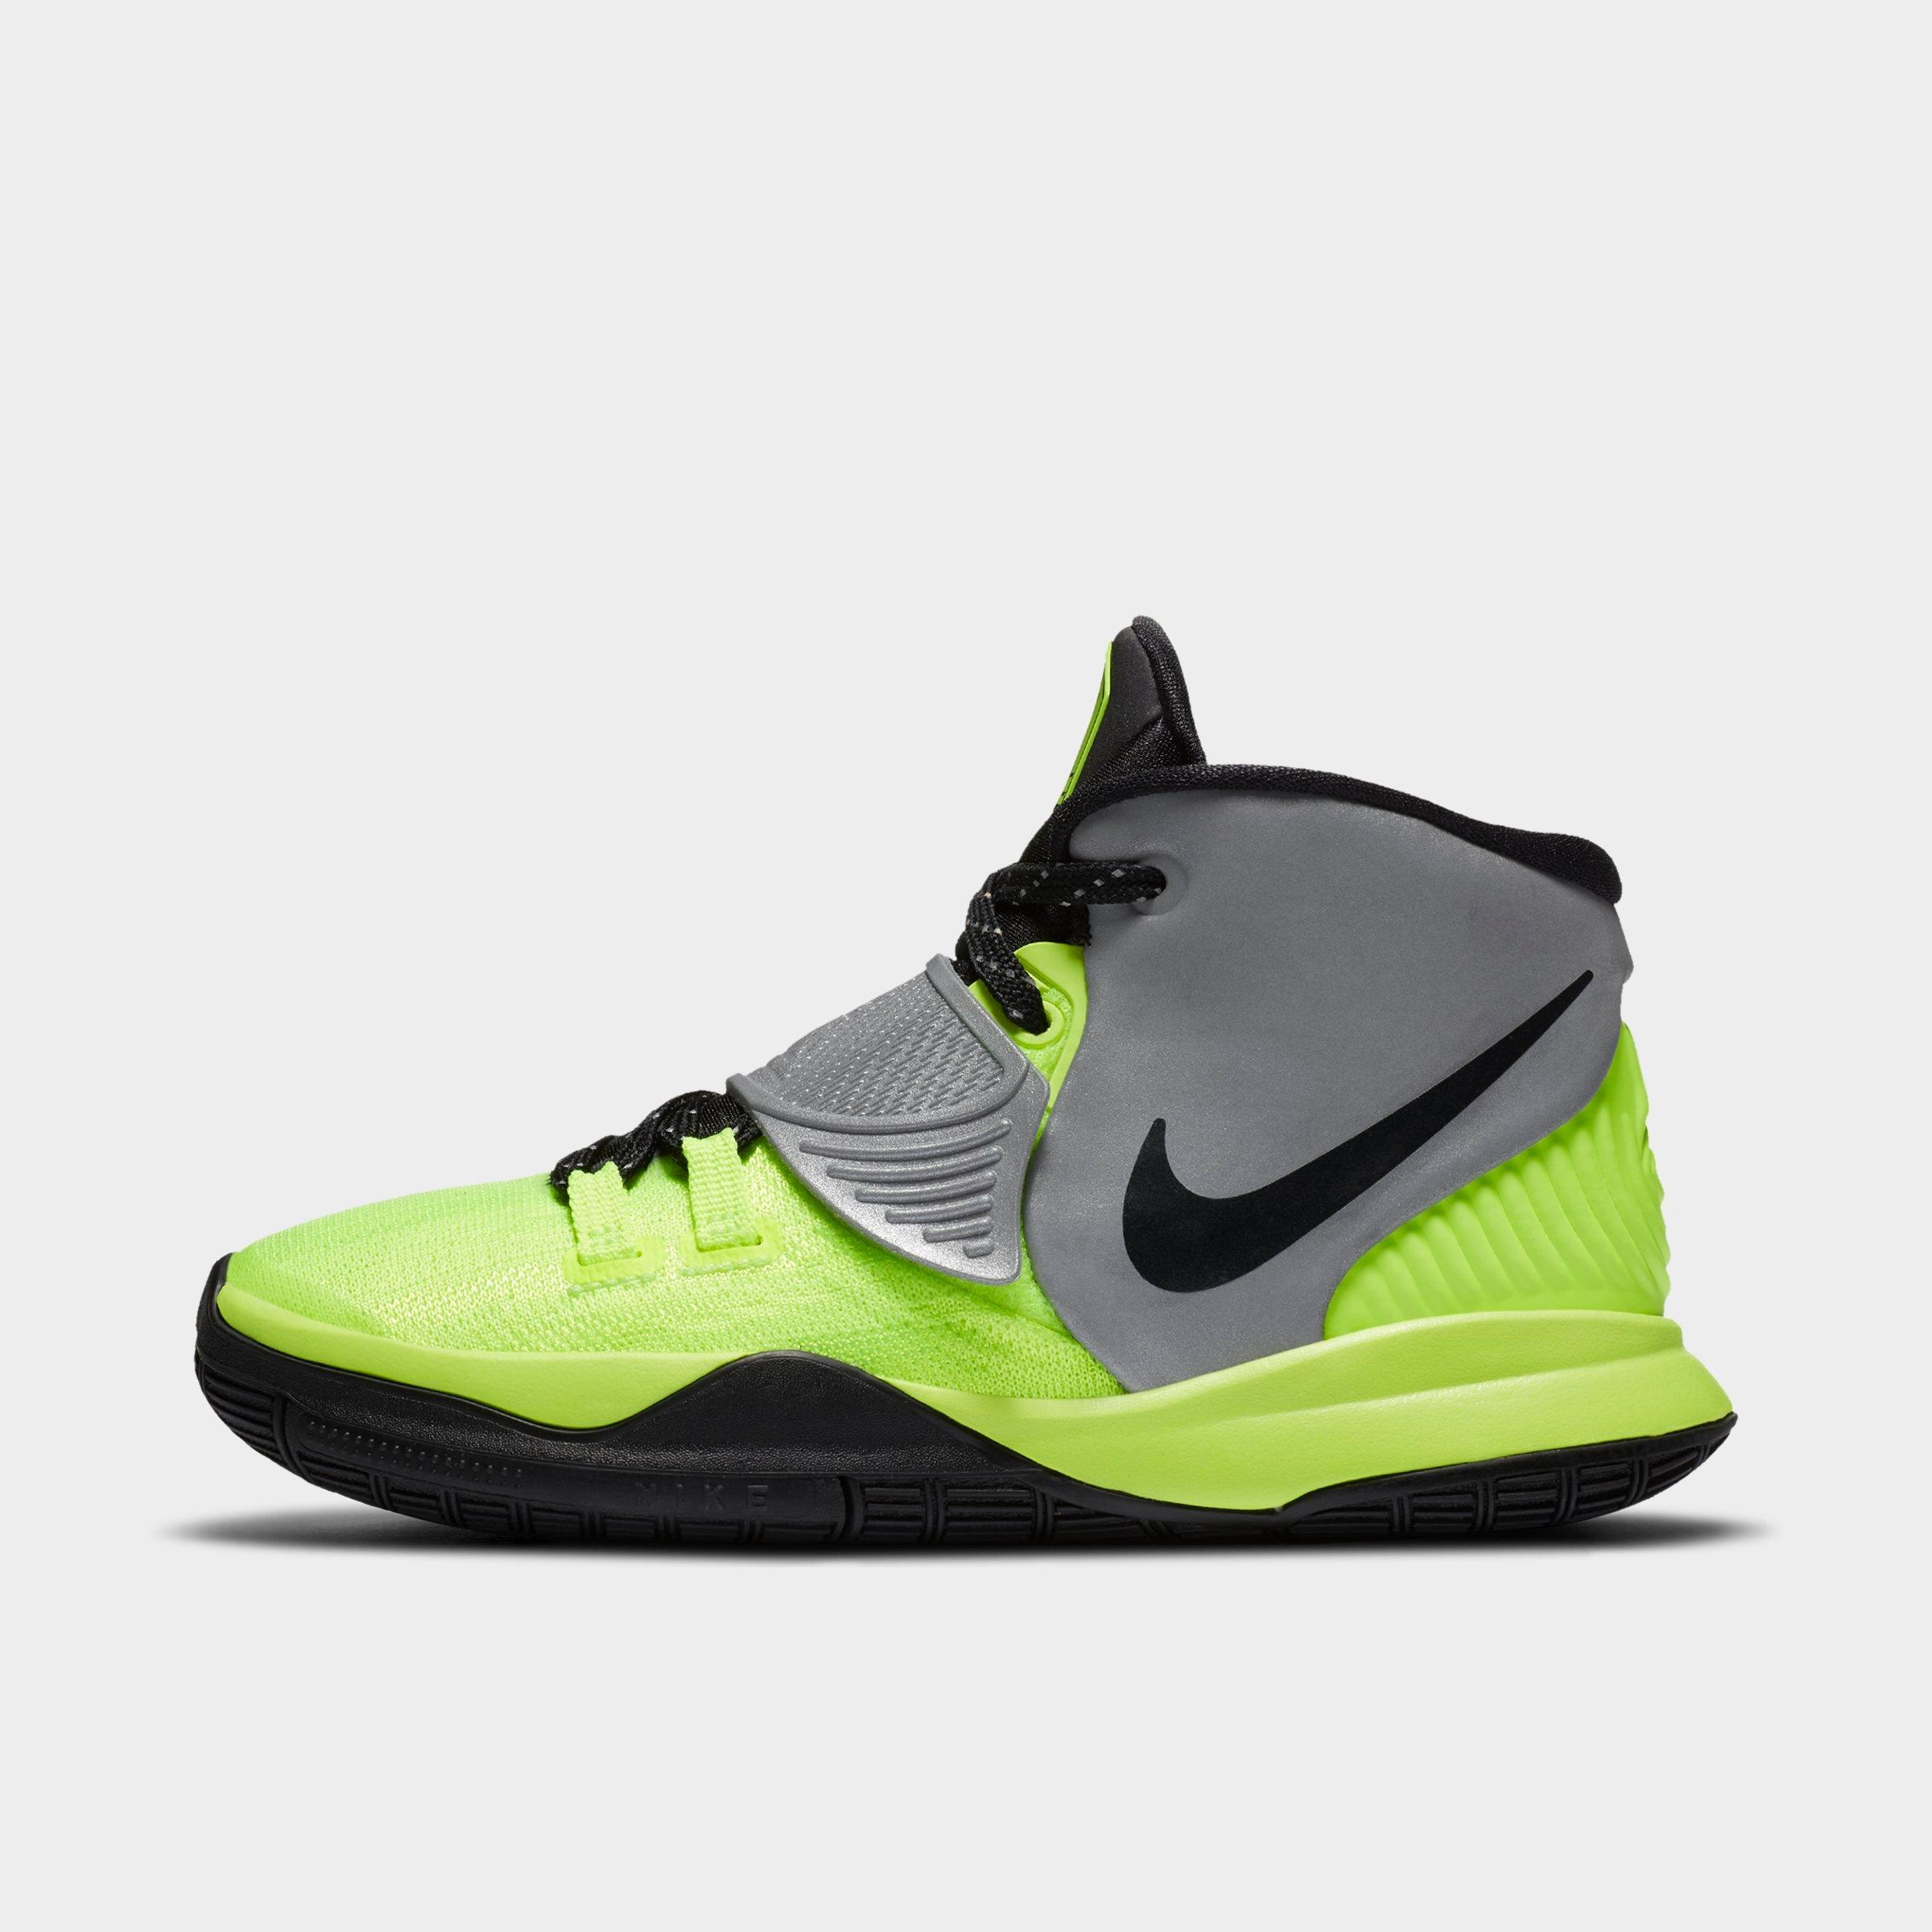 kyrie 6 mens basketball shoes